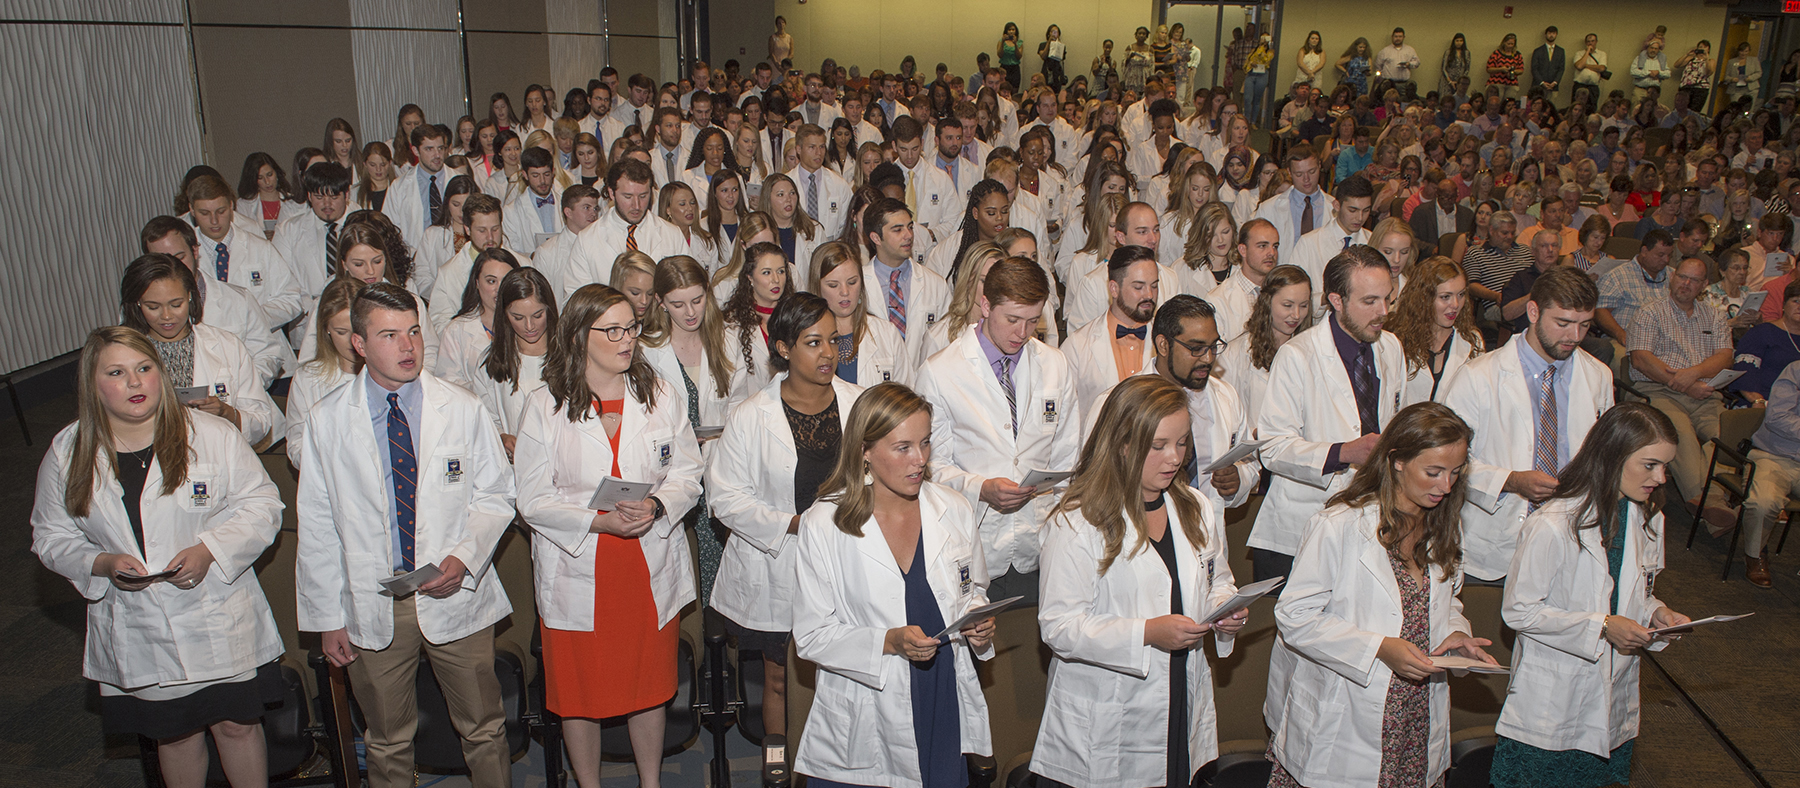 Students take the oath of a pharmacist